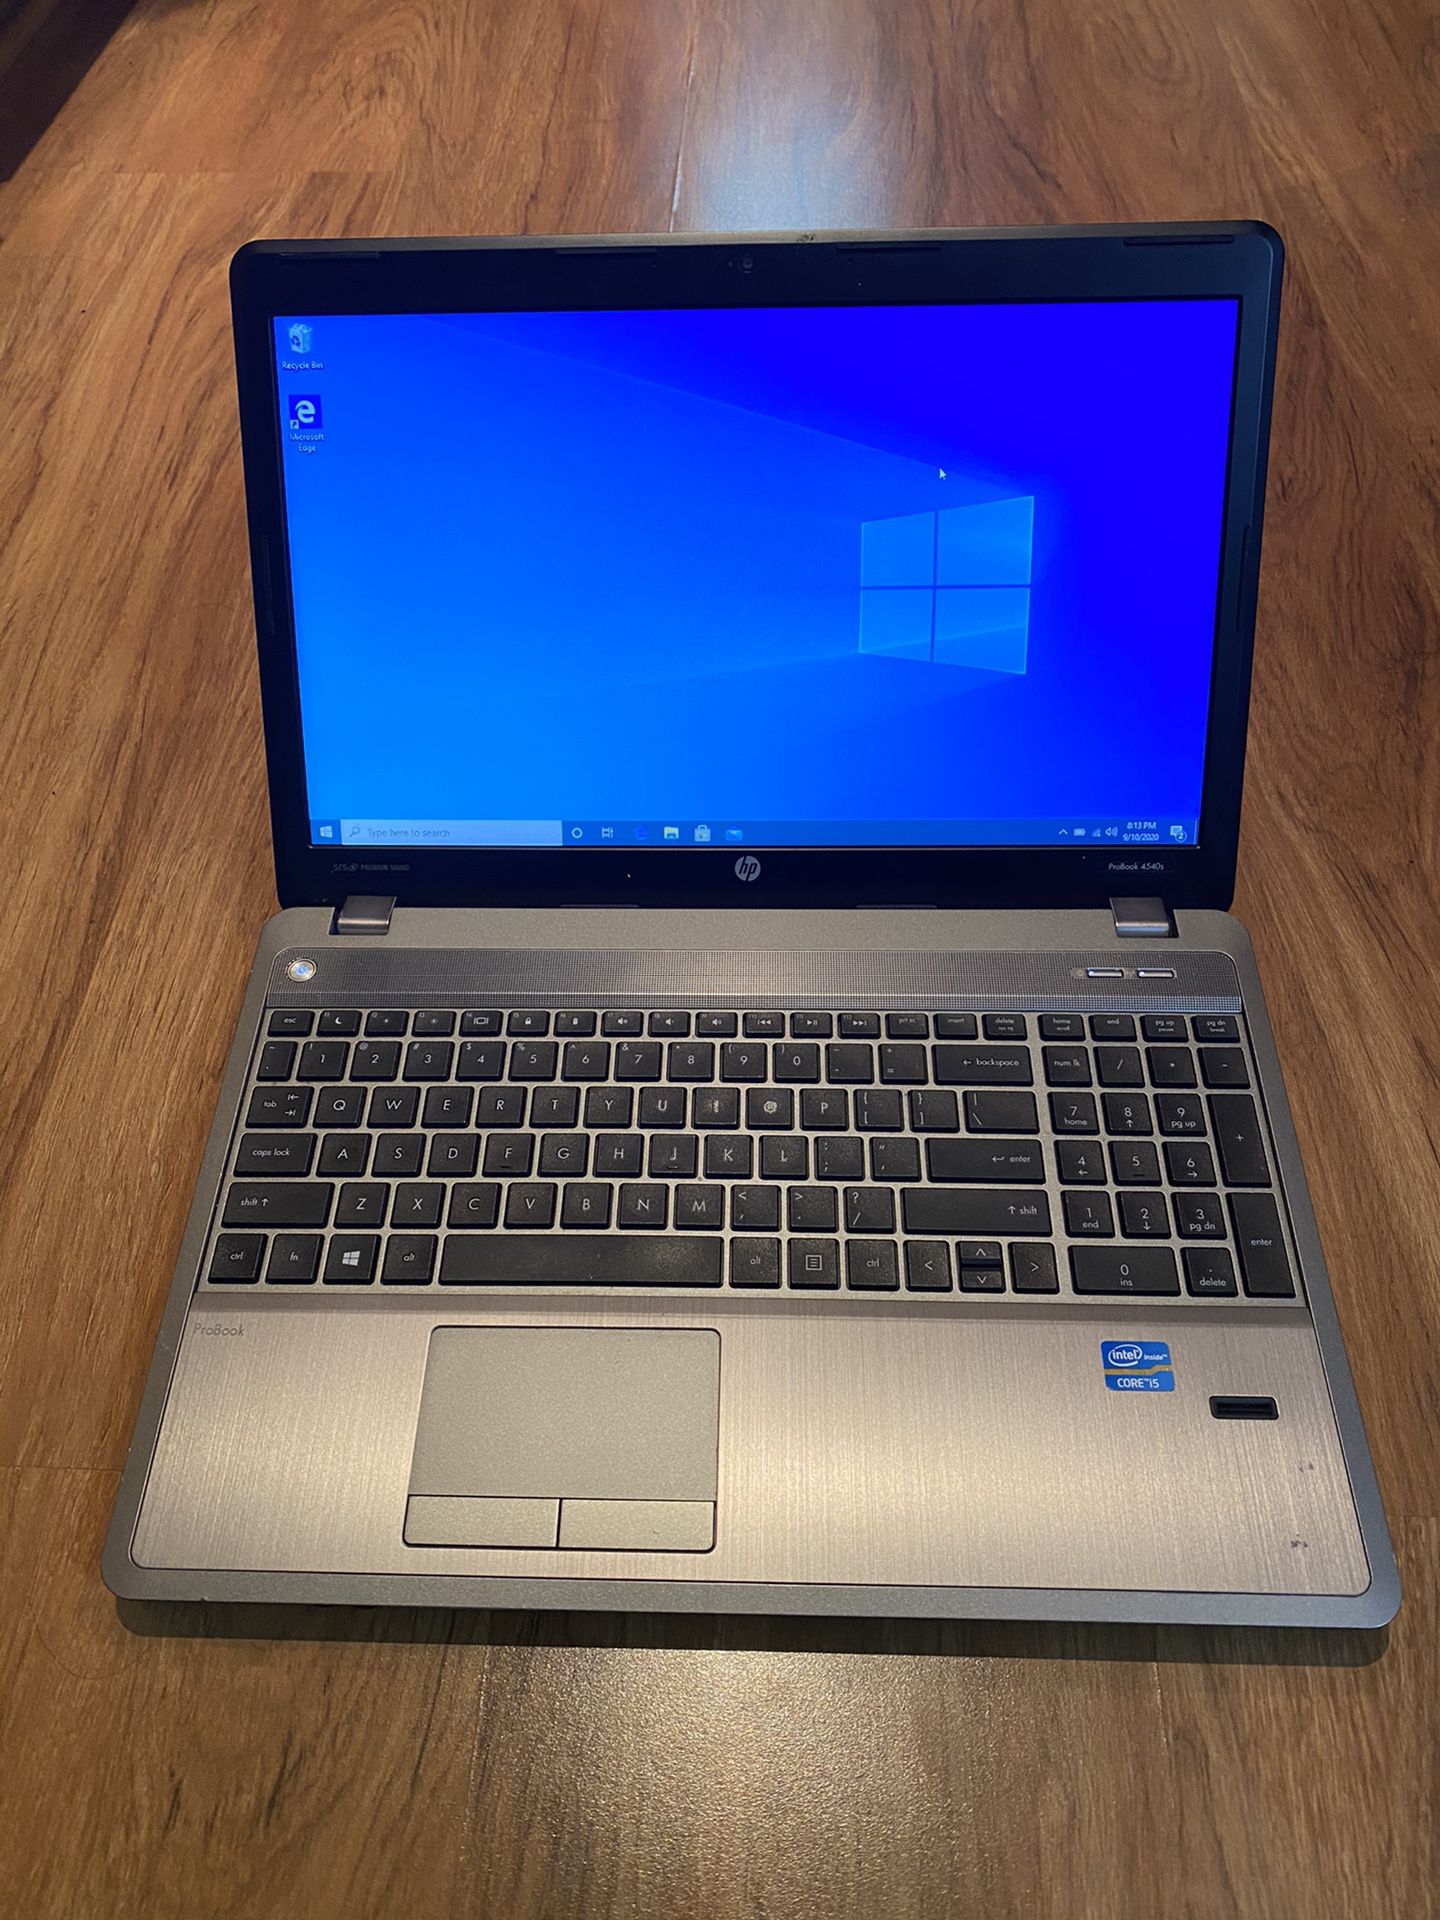 HP ProBook 4540s core i5 3rd gen 8GB Ram 500GB Hard Drive 15.6 inch HD Screen Laptop with HDMI output & charger in Excellent Working condition!!!!